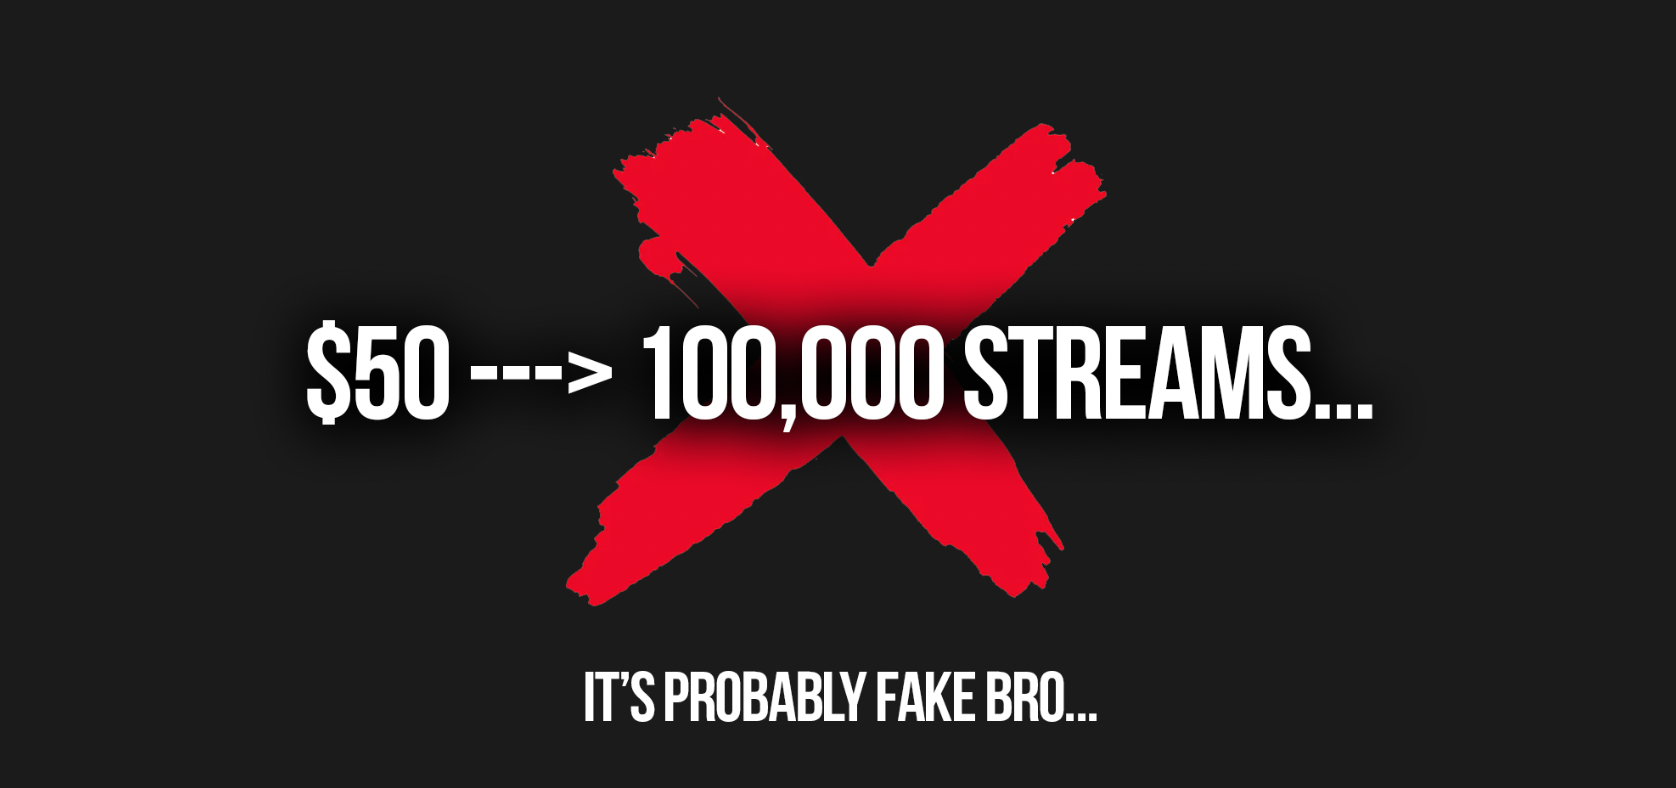 $50 for 100k streams is probably fake